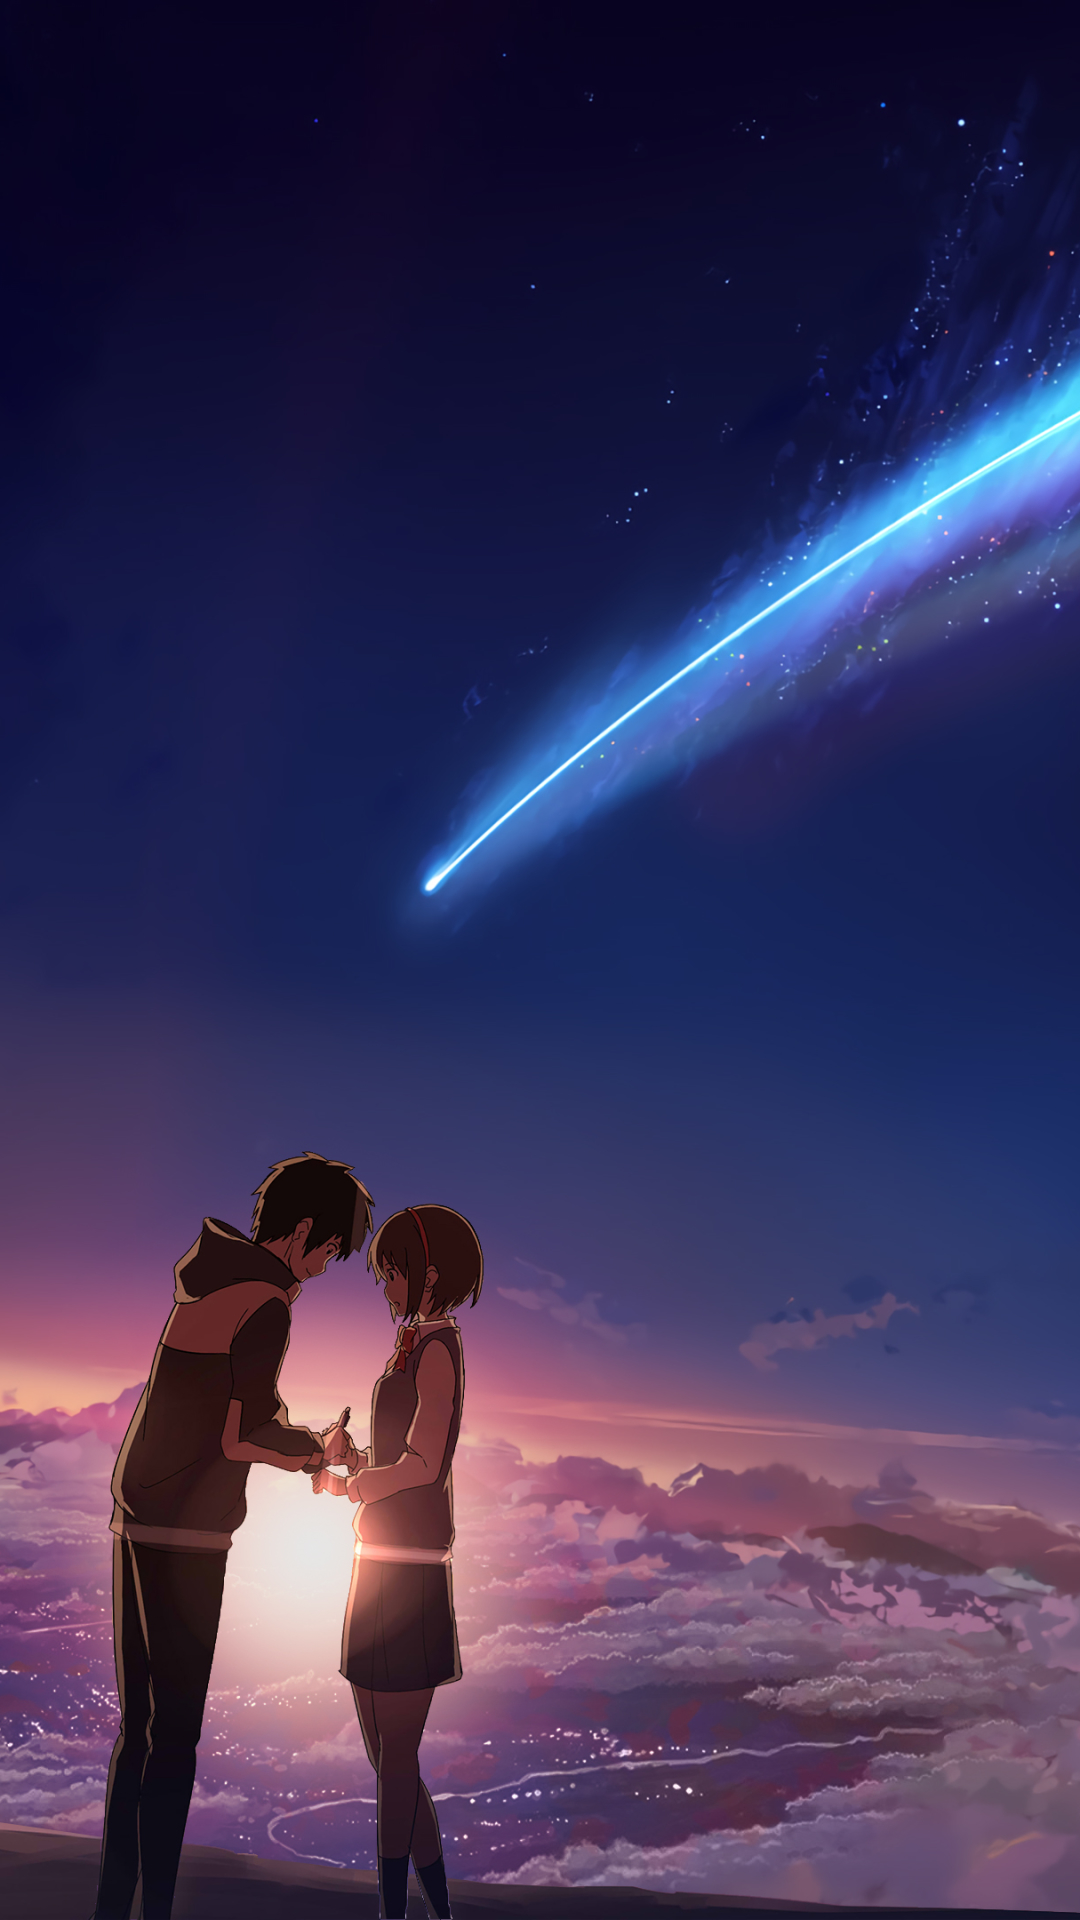 Kimi No Na Wa Your Name Android Wallpaper Android HD Wallpapers